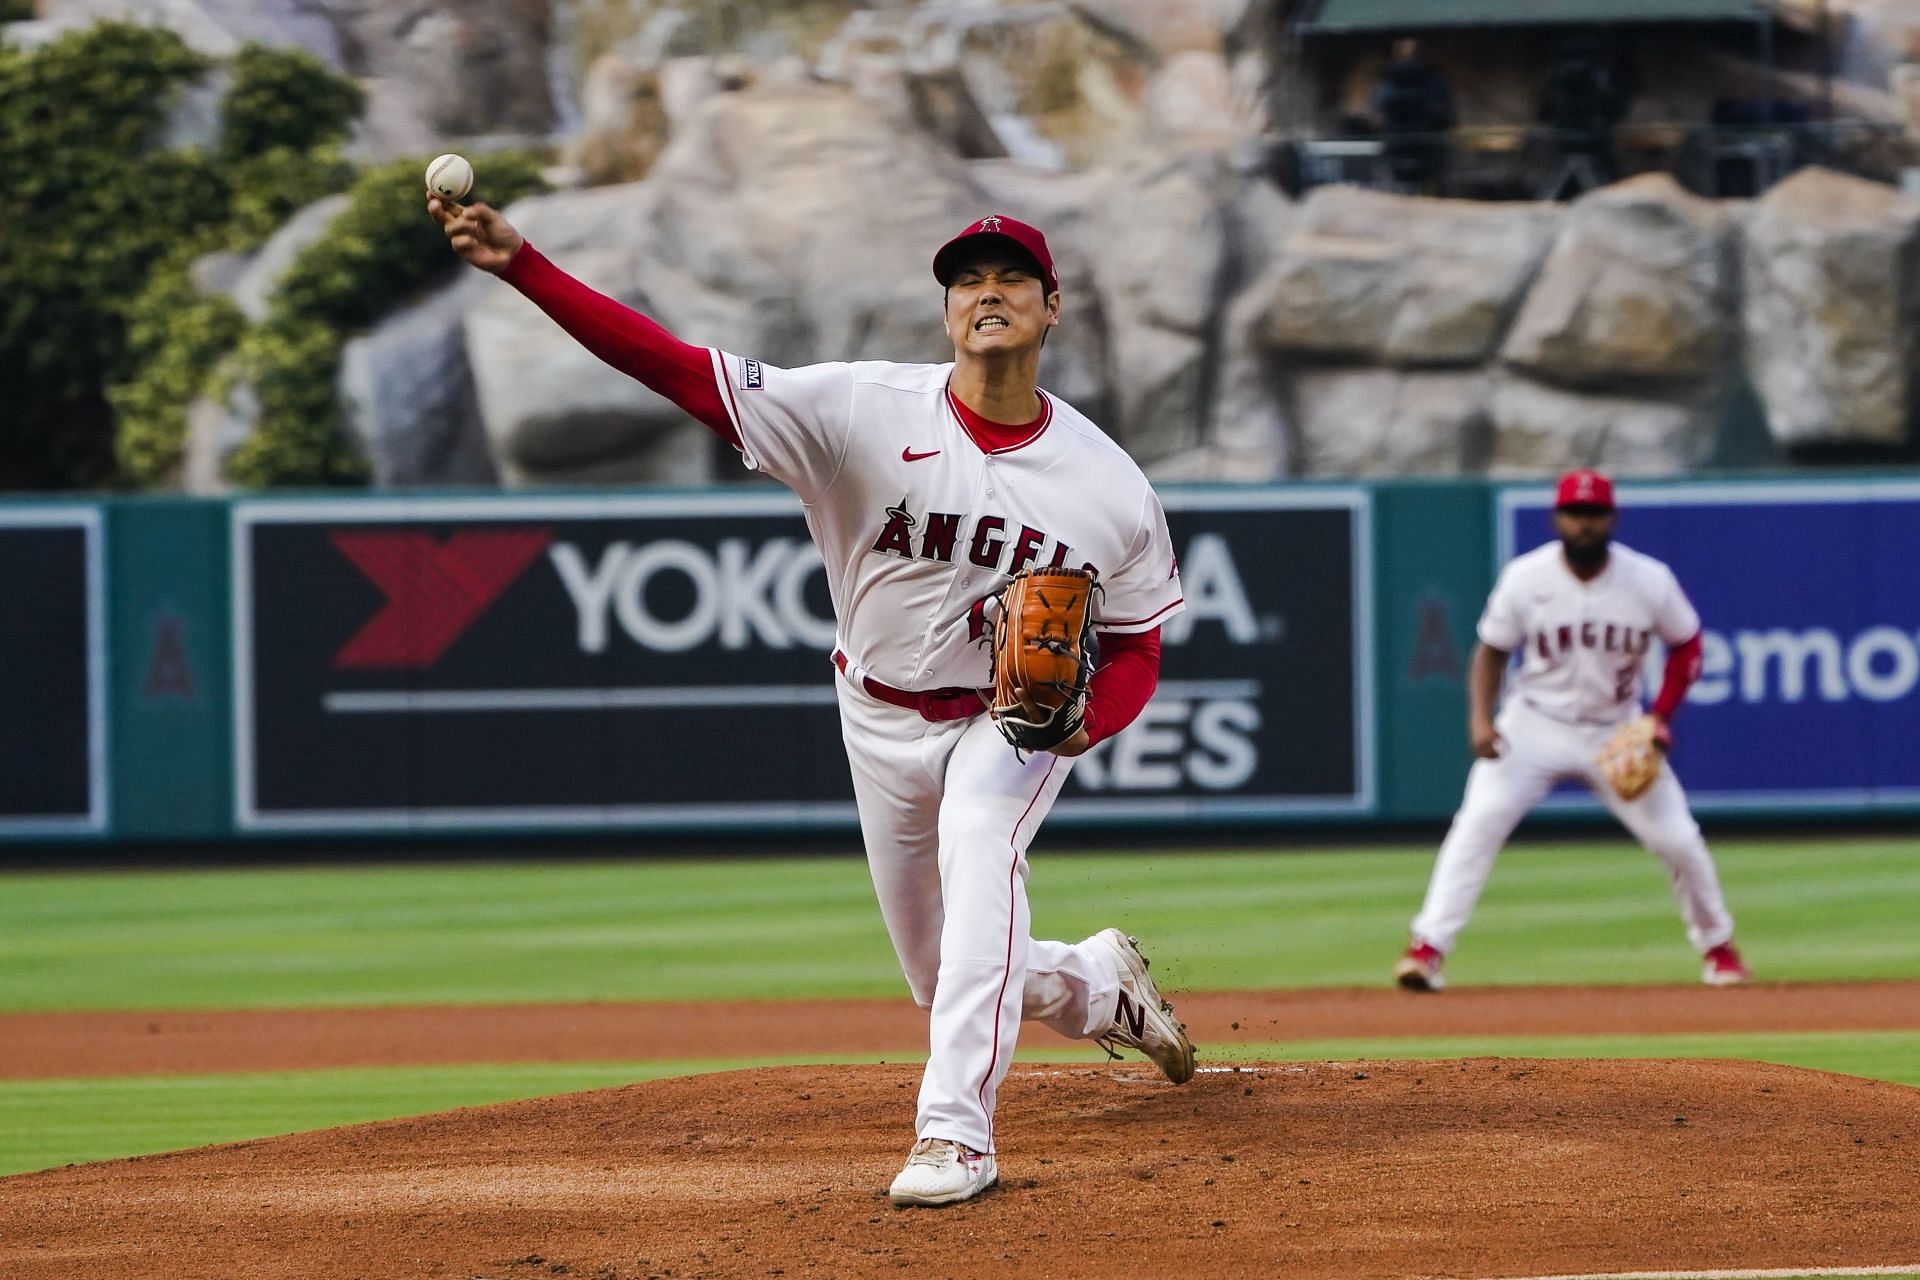 Starting pitcher Shohei Ohtani throws against the San Francisco Giants in Anaheim